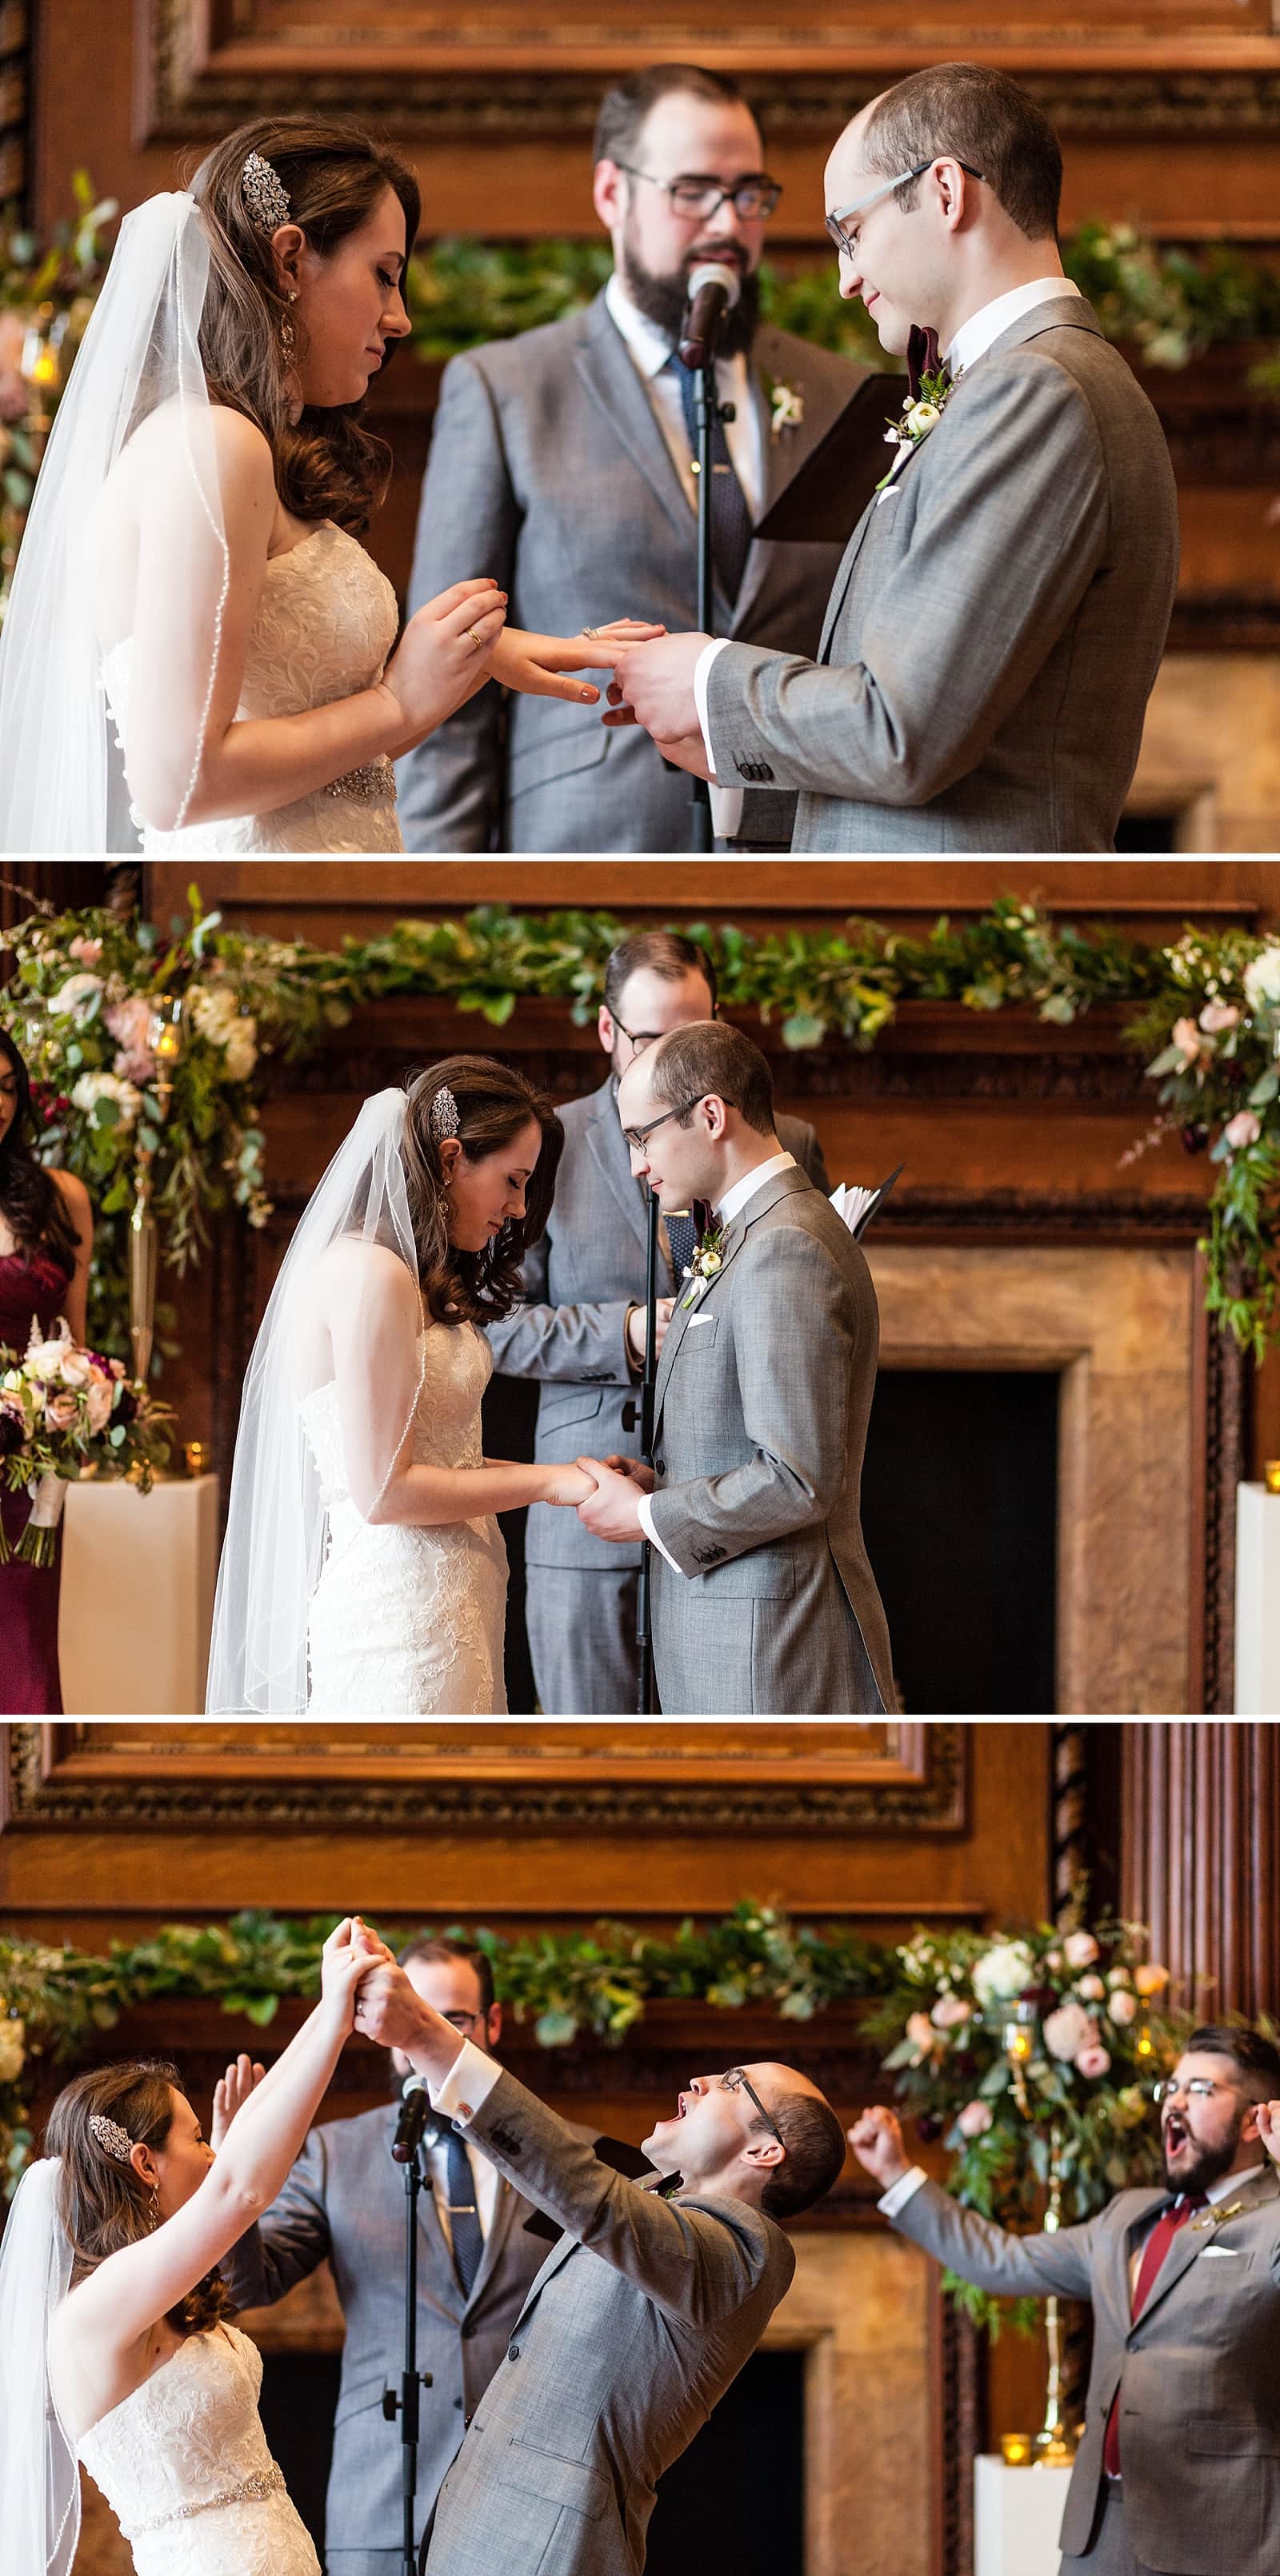 Bride and Groom exchanging rings and celebrating their marriage, wedding ceremony, College of Physicians wedding